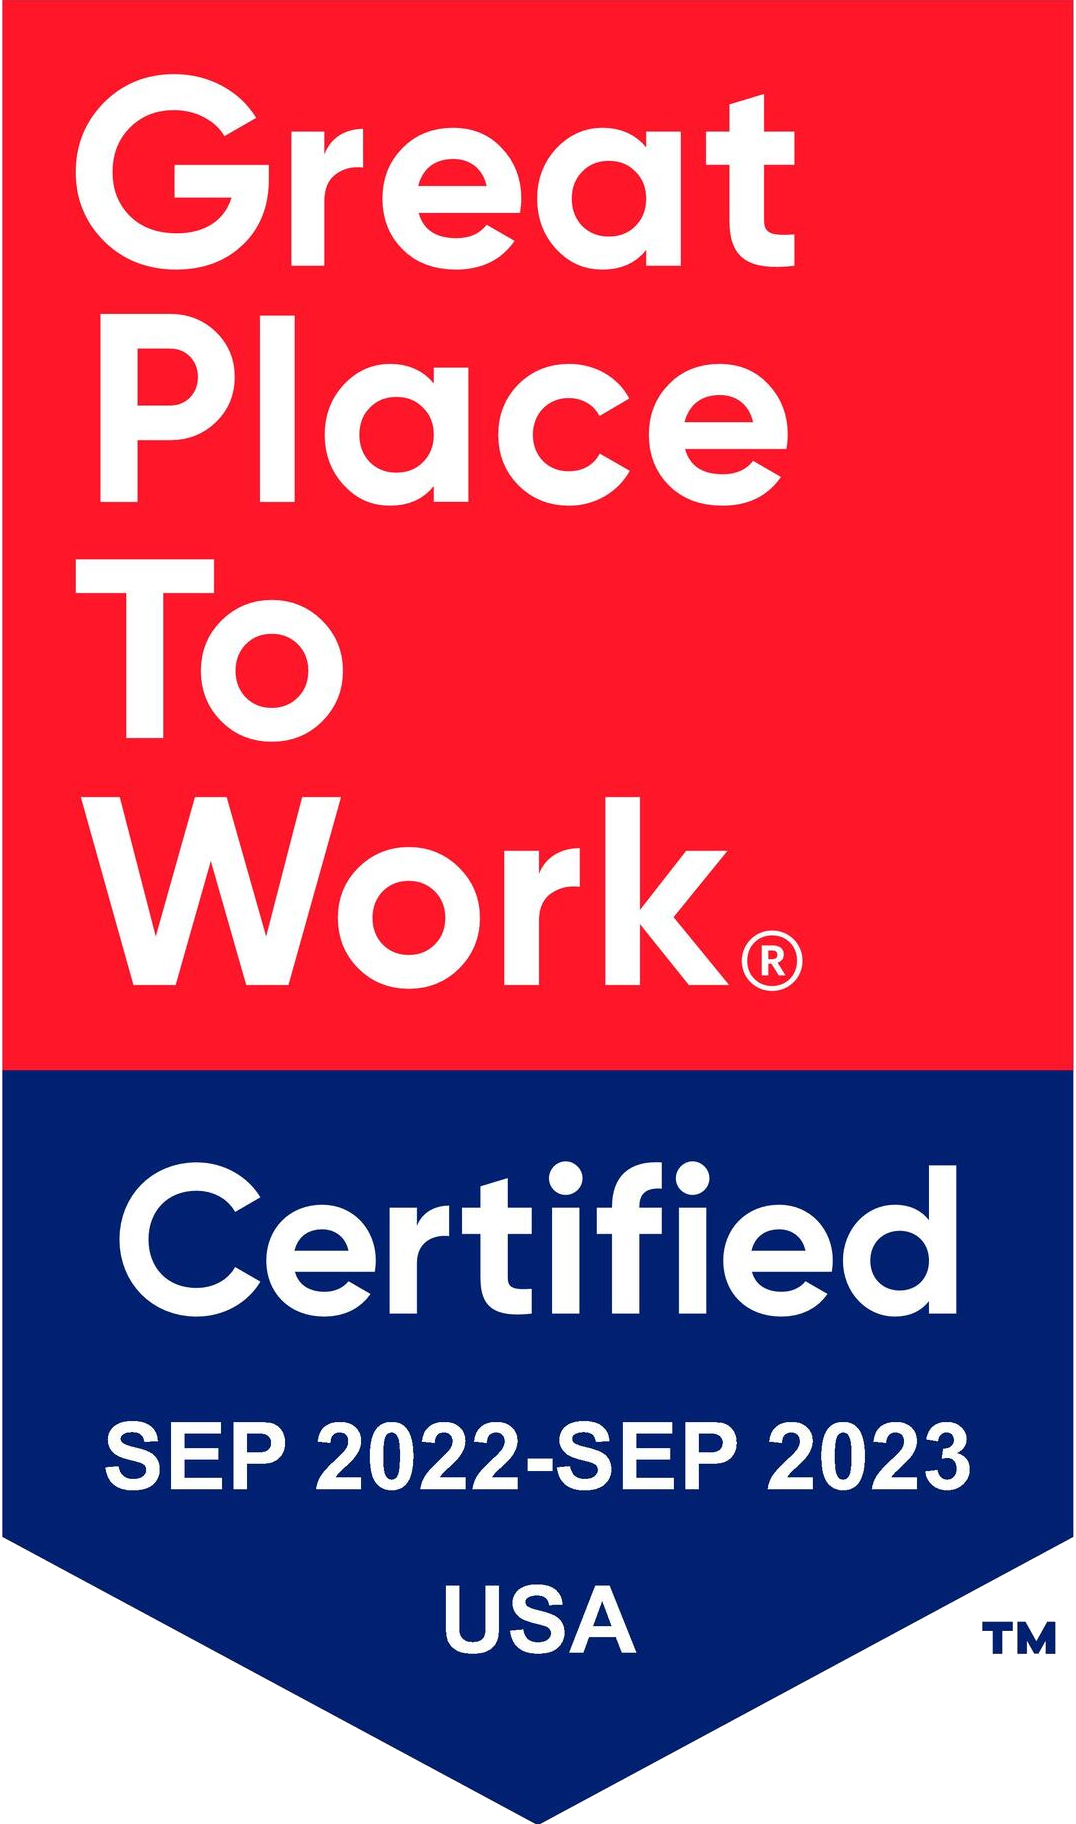 Great place to work certified badge 2022 to 2023